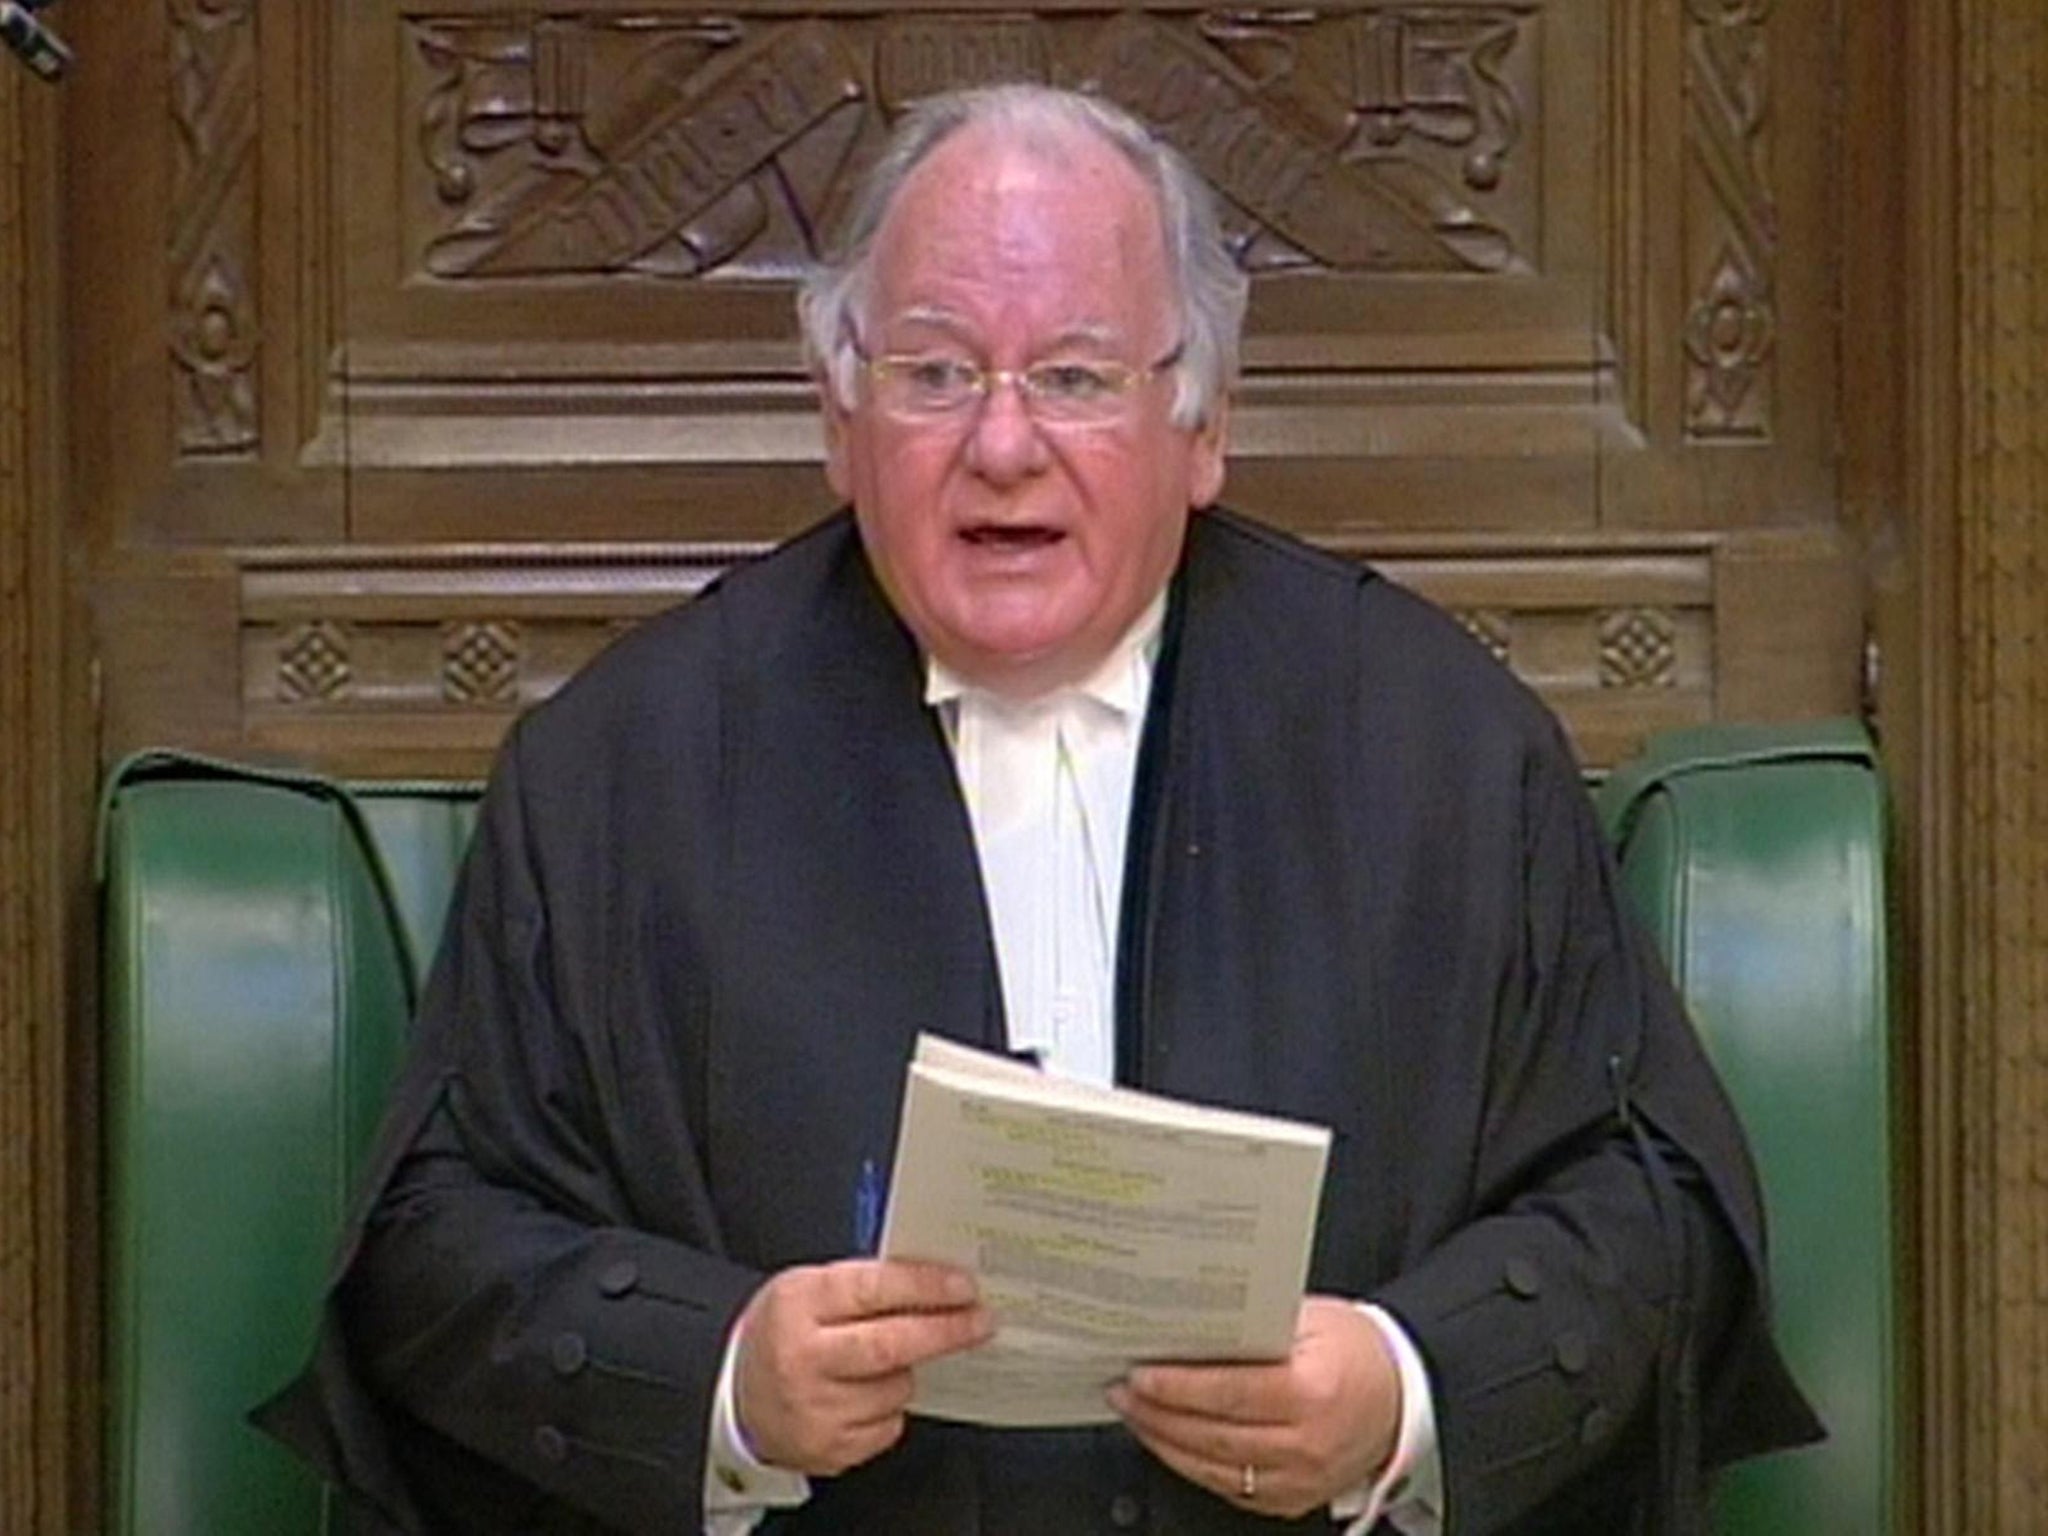 Michael Martin served as House of Commons Speaker between 2000 and 2009